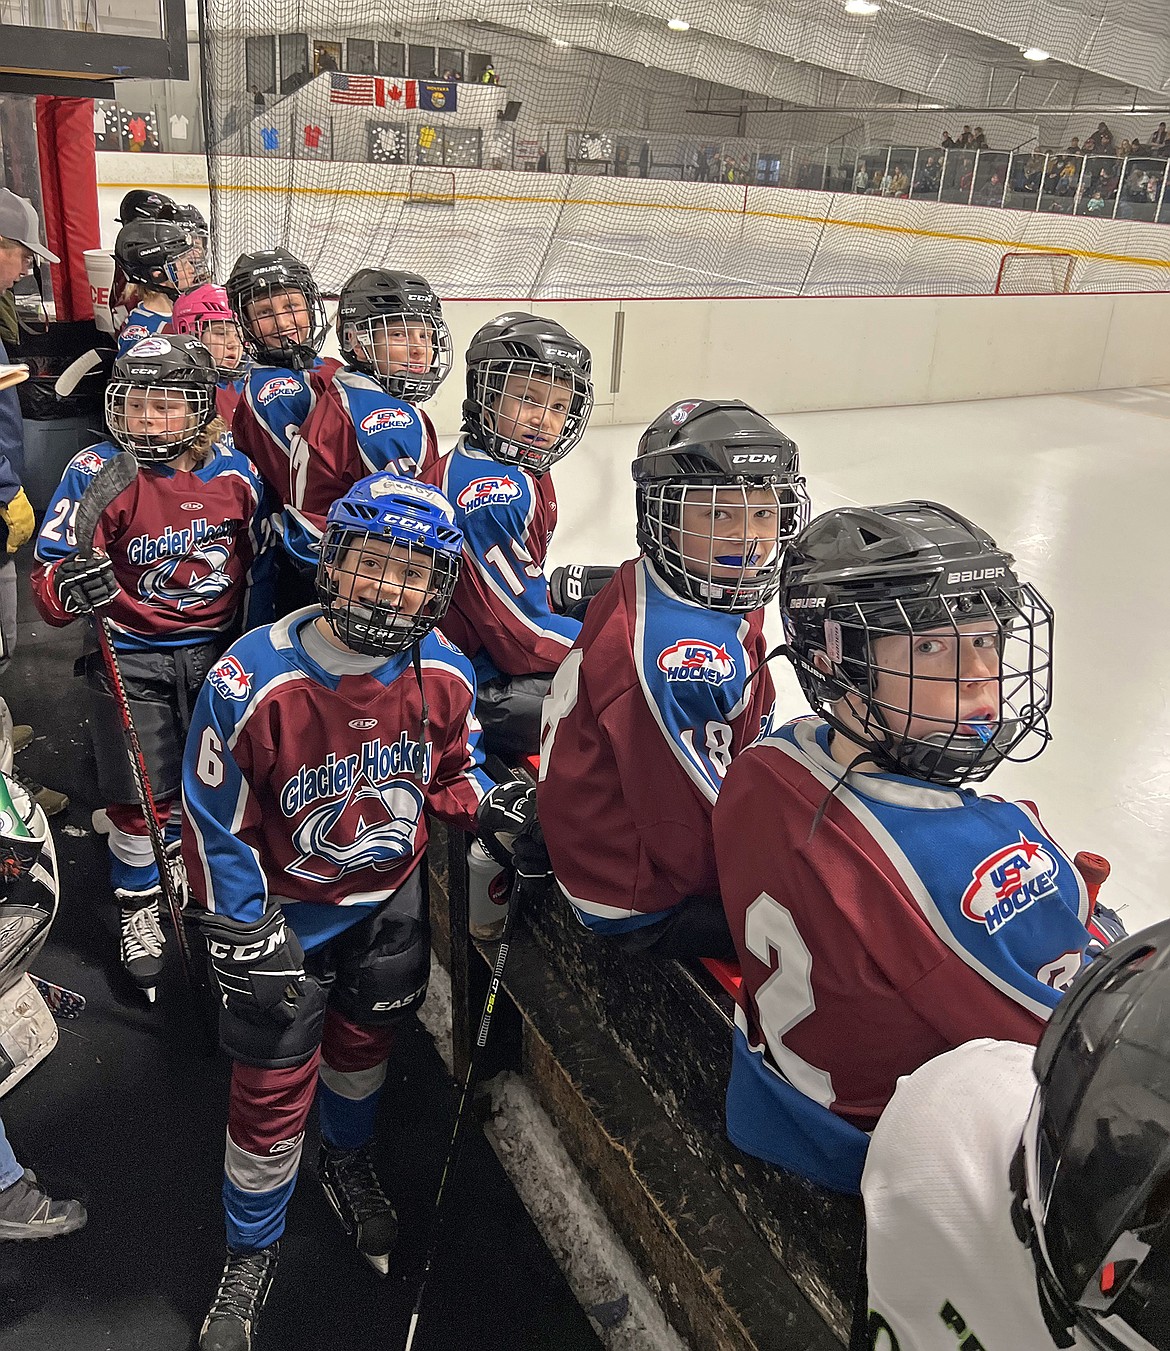 The Glacier Avalanche Squirts 10U hockey team along the bench prior to a game at the State Championship in Billings last weekend. (Provided photo)